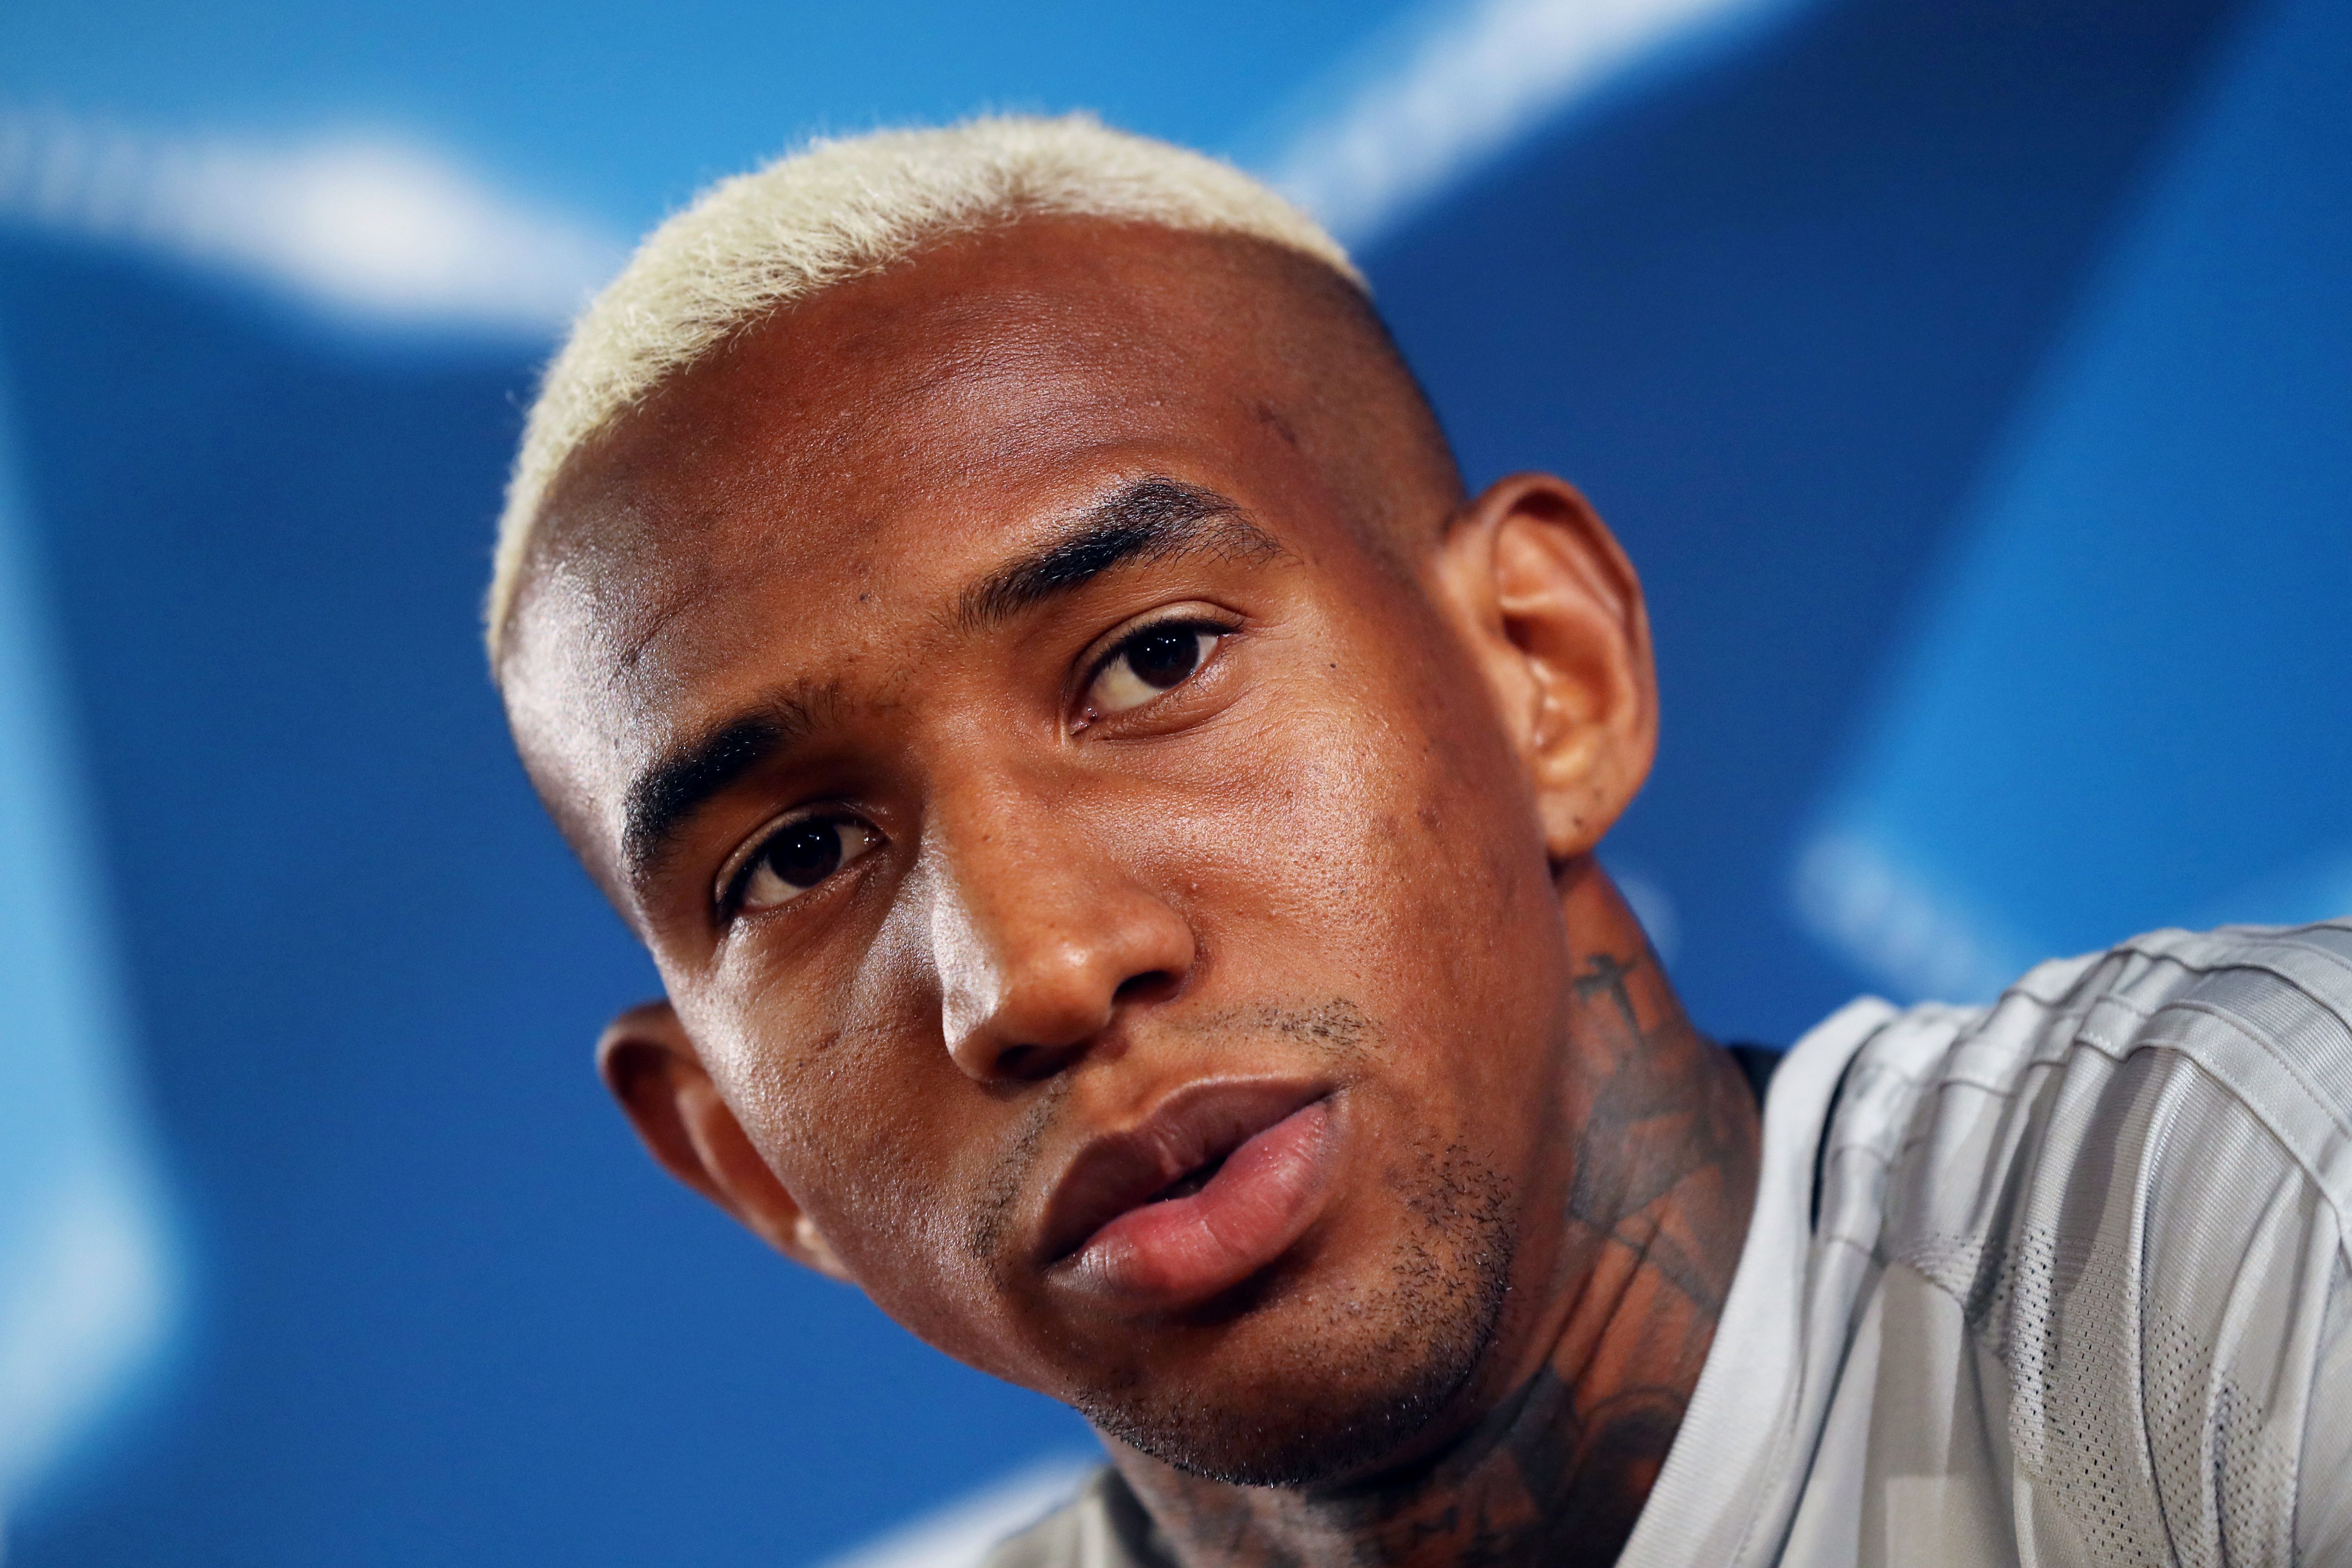 Besiktas' Brazilian forward Anderson Talisca speaks during a press conference on October 16, 2017, at the Louis II Stadium in Monaco, on the eve of the UEFA Champions League football match between Monaco and Besiktas. / AFP PHOTO / VALERY HACHE        (Photo credit should read VALERY HACHE/AFP/Getty Images)